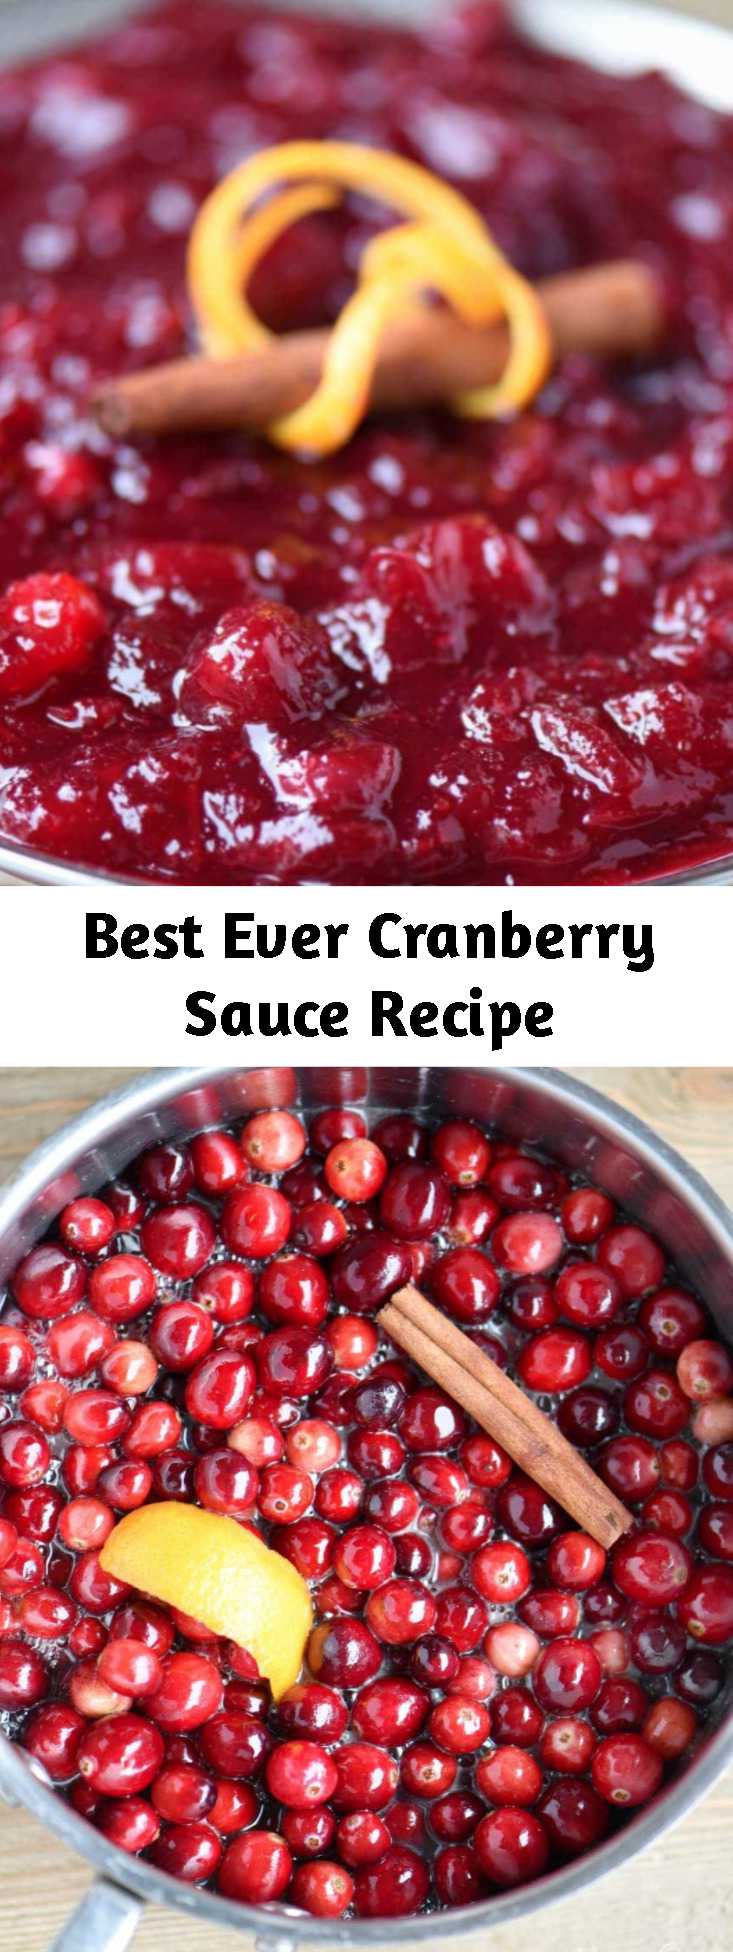 Best Ever Cranberry Sauce Recipe - Look no further for the Best Ever Cranberry Sauce! This easy and delightful recipe takes only 15 minutes to make and a handful of ingredients! Spiced with cinnamon and sweetened with orange juice, it is the best combination of sweet and tart! The perfect complement to your holiday meal!